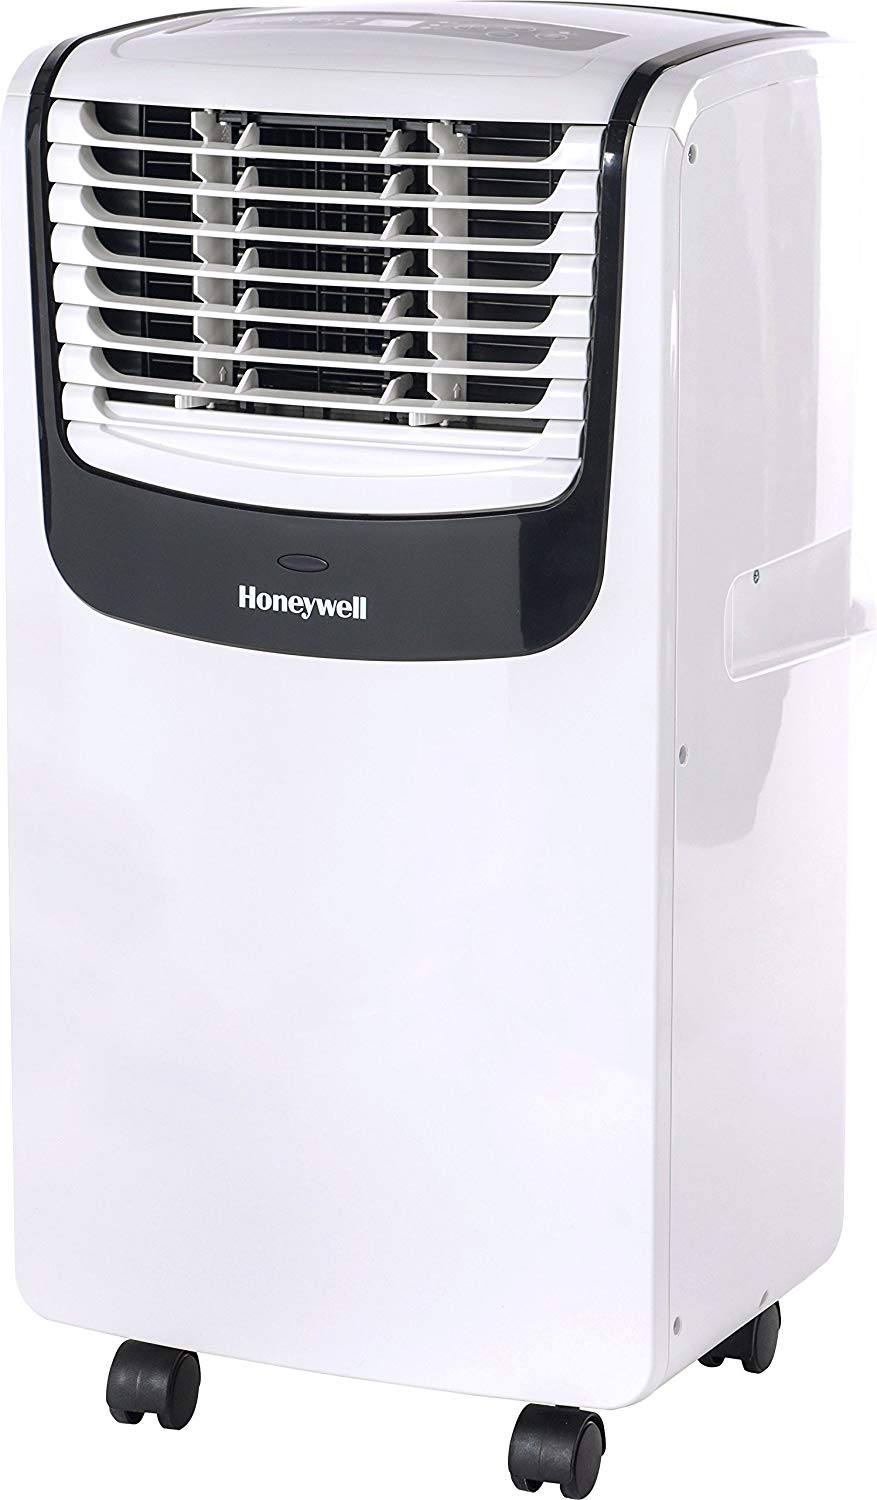 Honeywell MO08CESWK Compact Portable Air Conditioner with ...